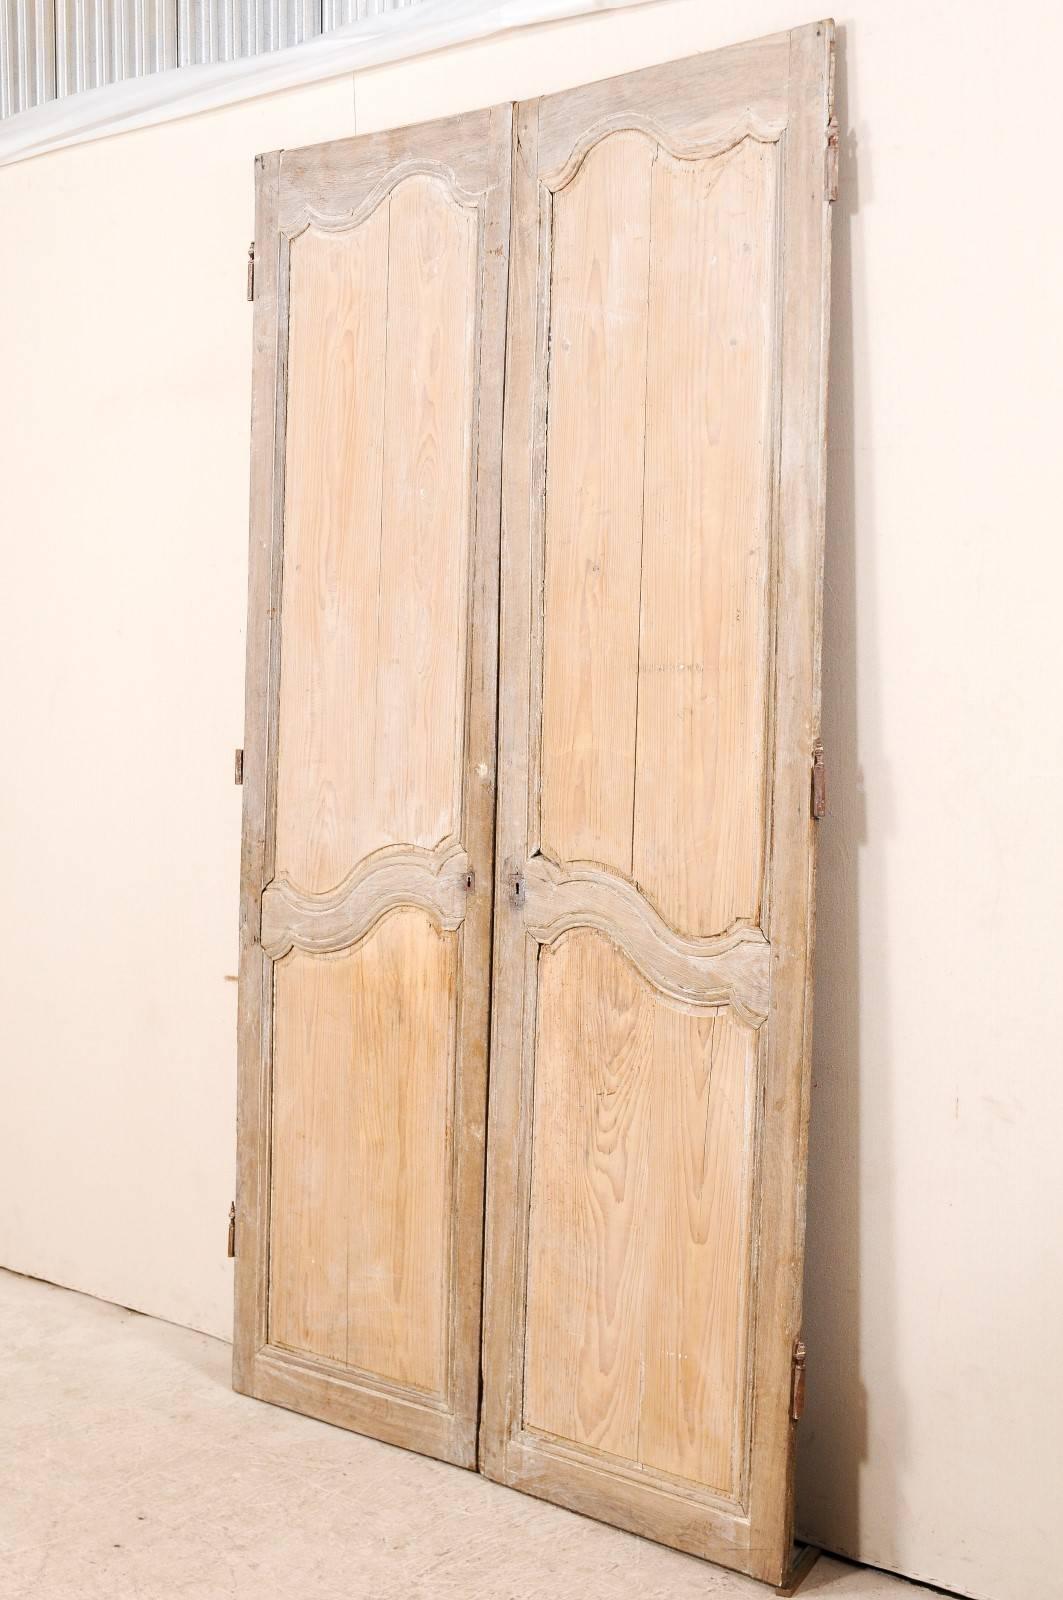 Carved Pair of 19th Century Tall French Doors with a Light Wash of Paint